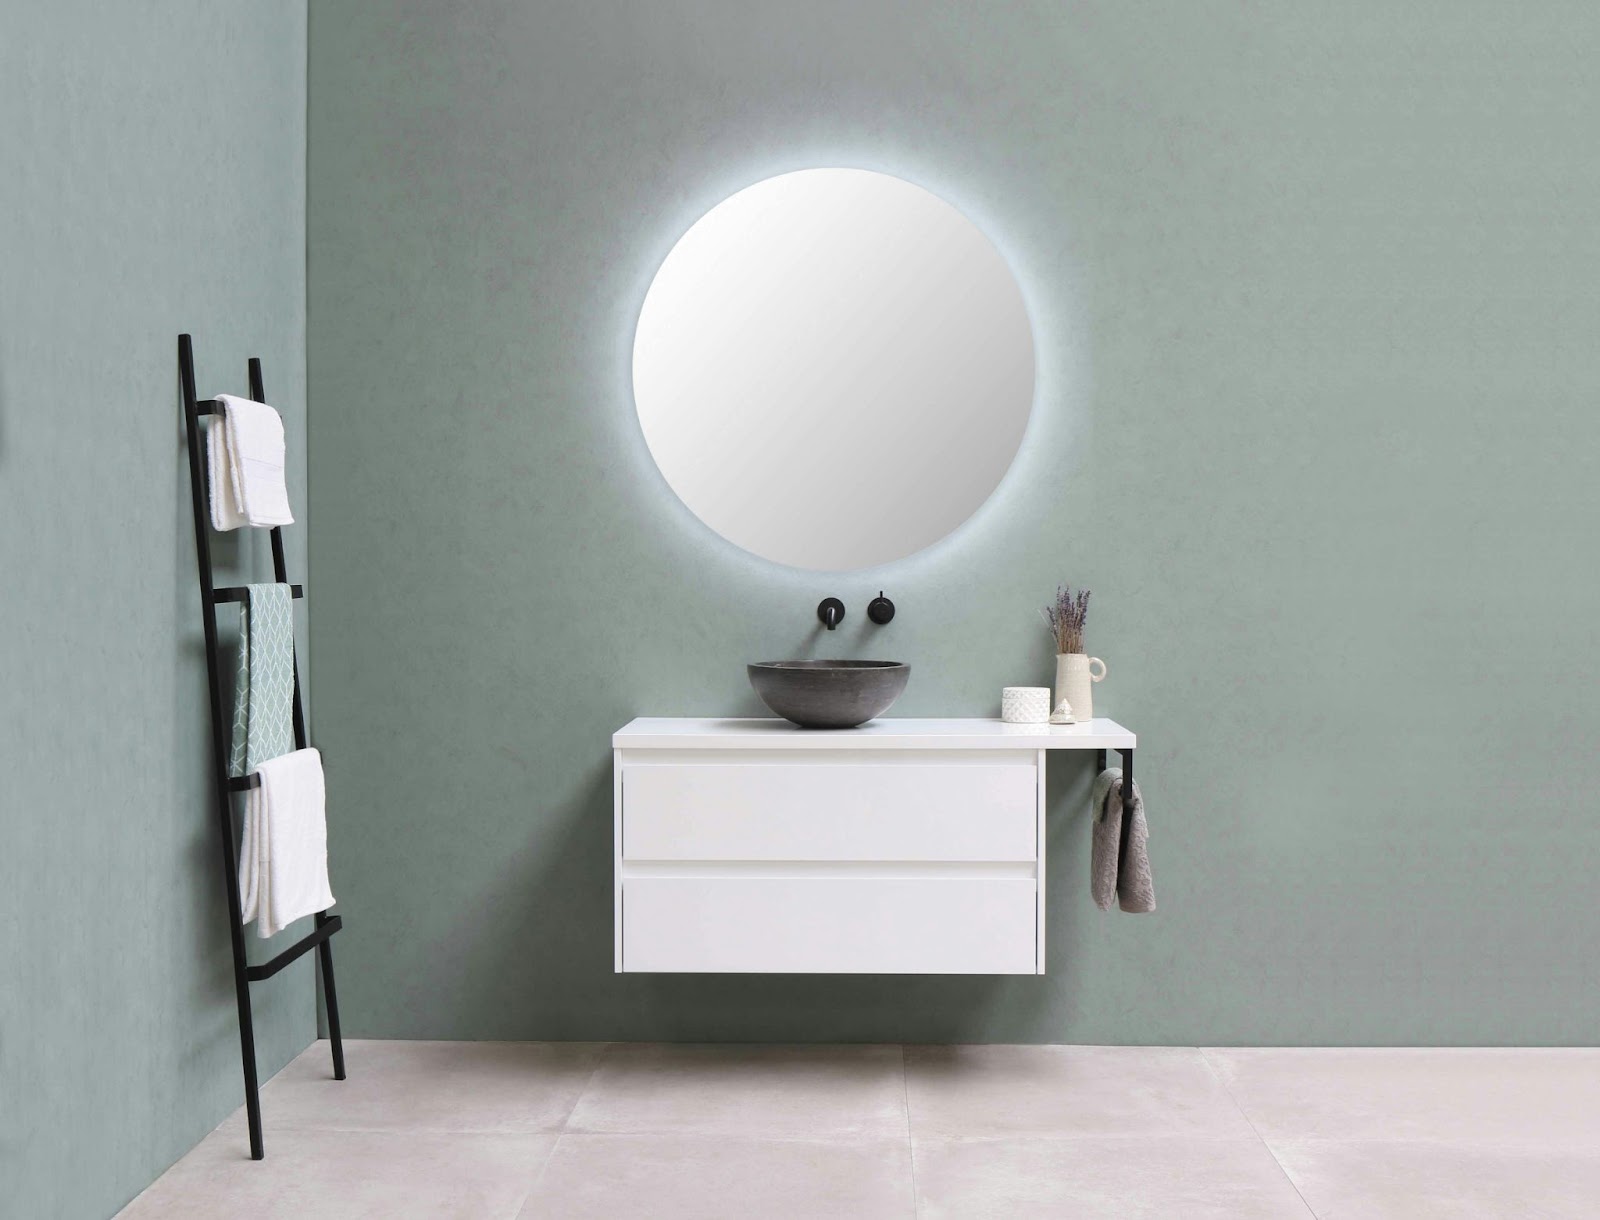 A round mirror in the bathroom